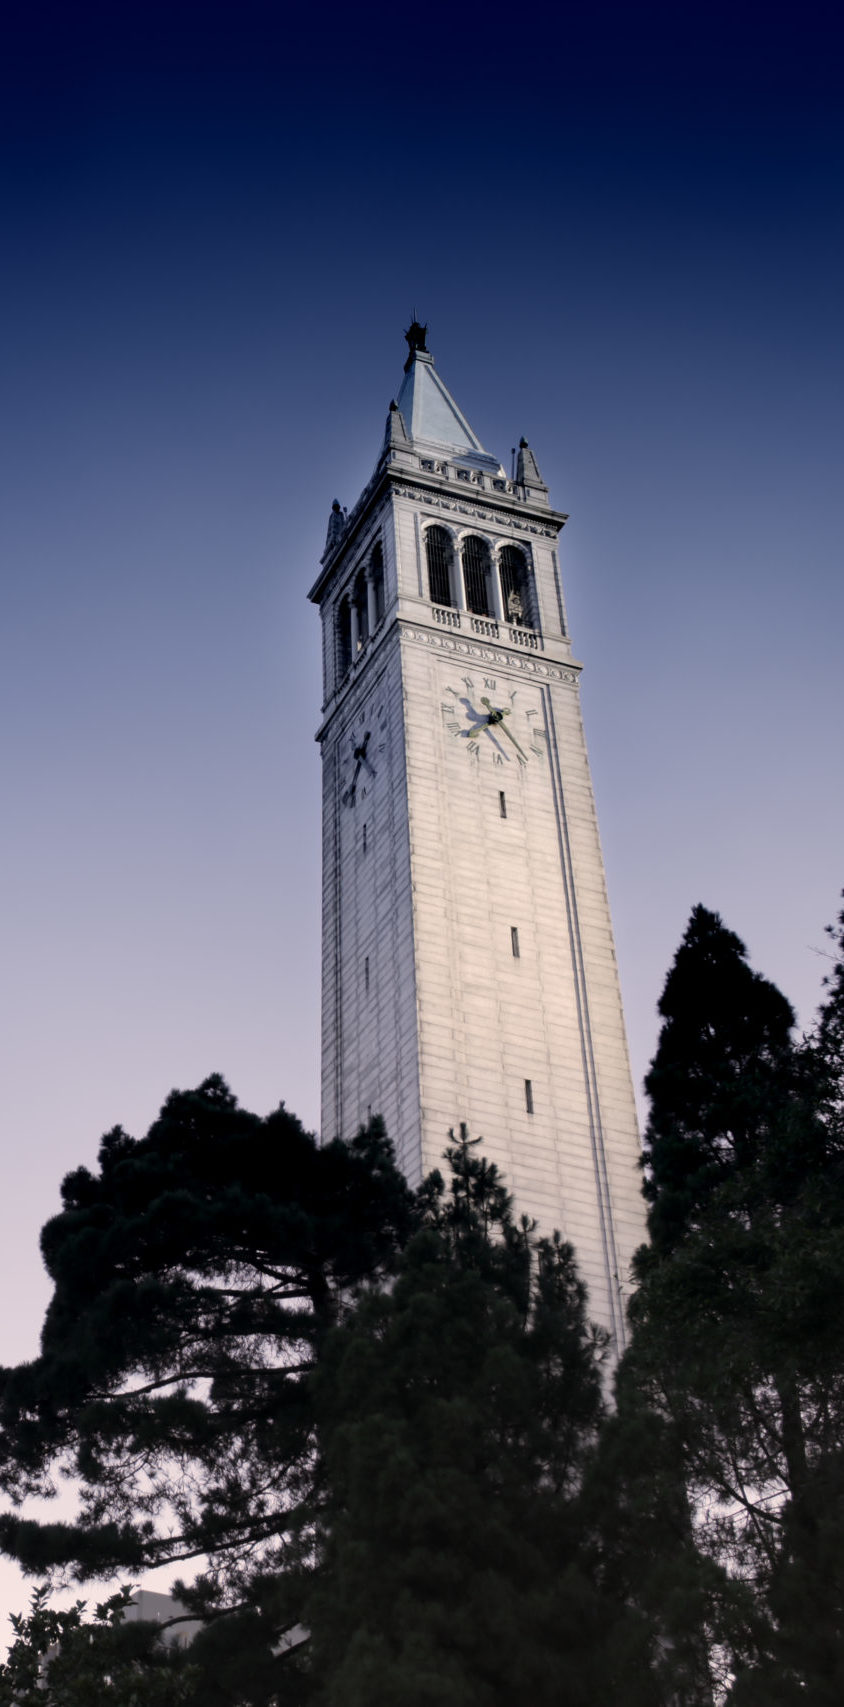 Exterior of Sather Tower, also known as the Campanile.